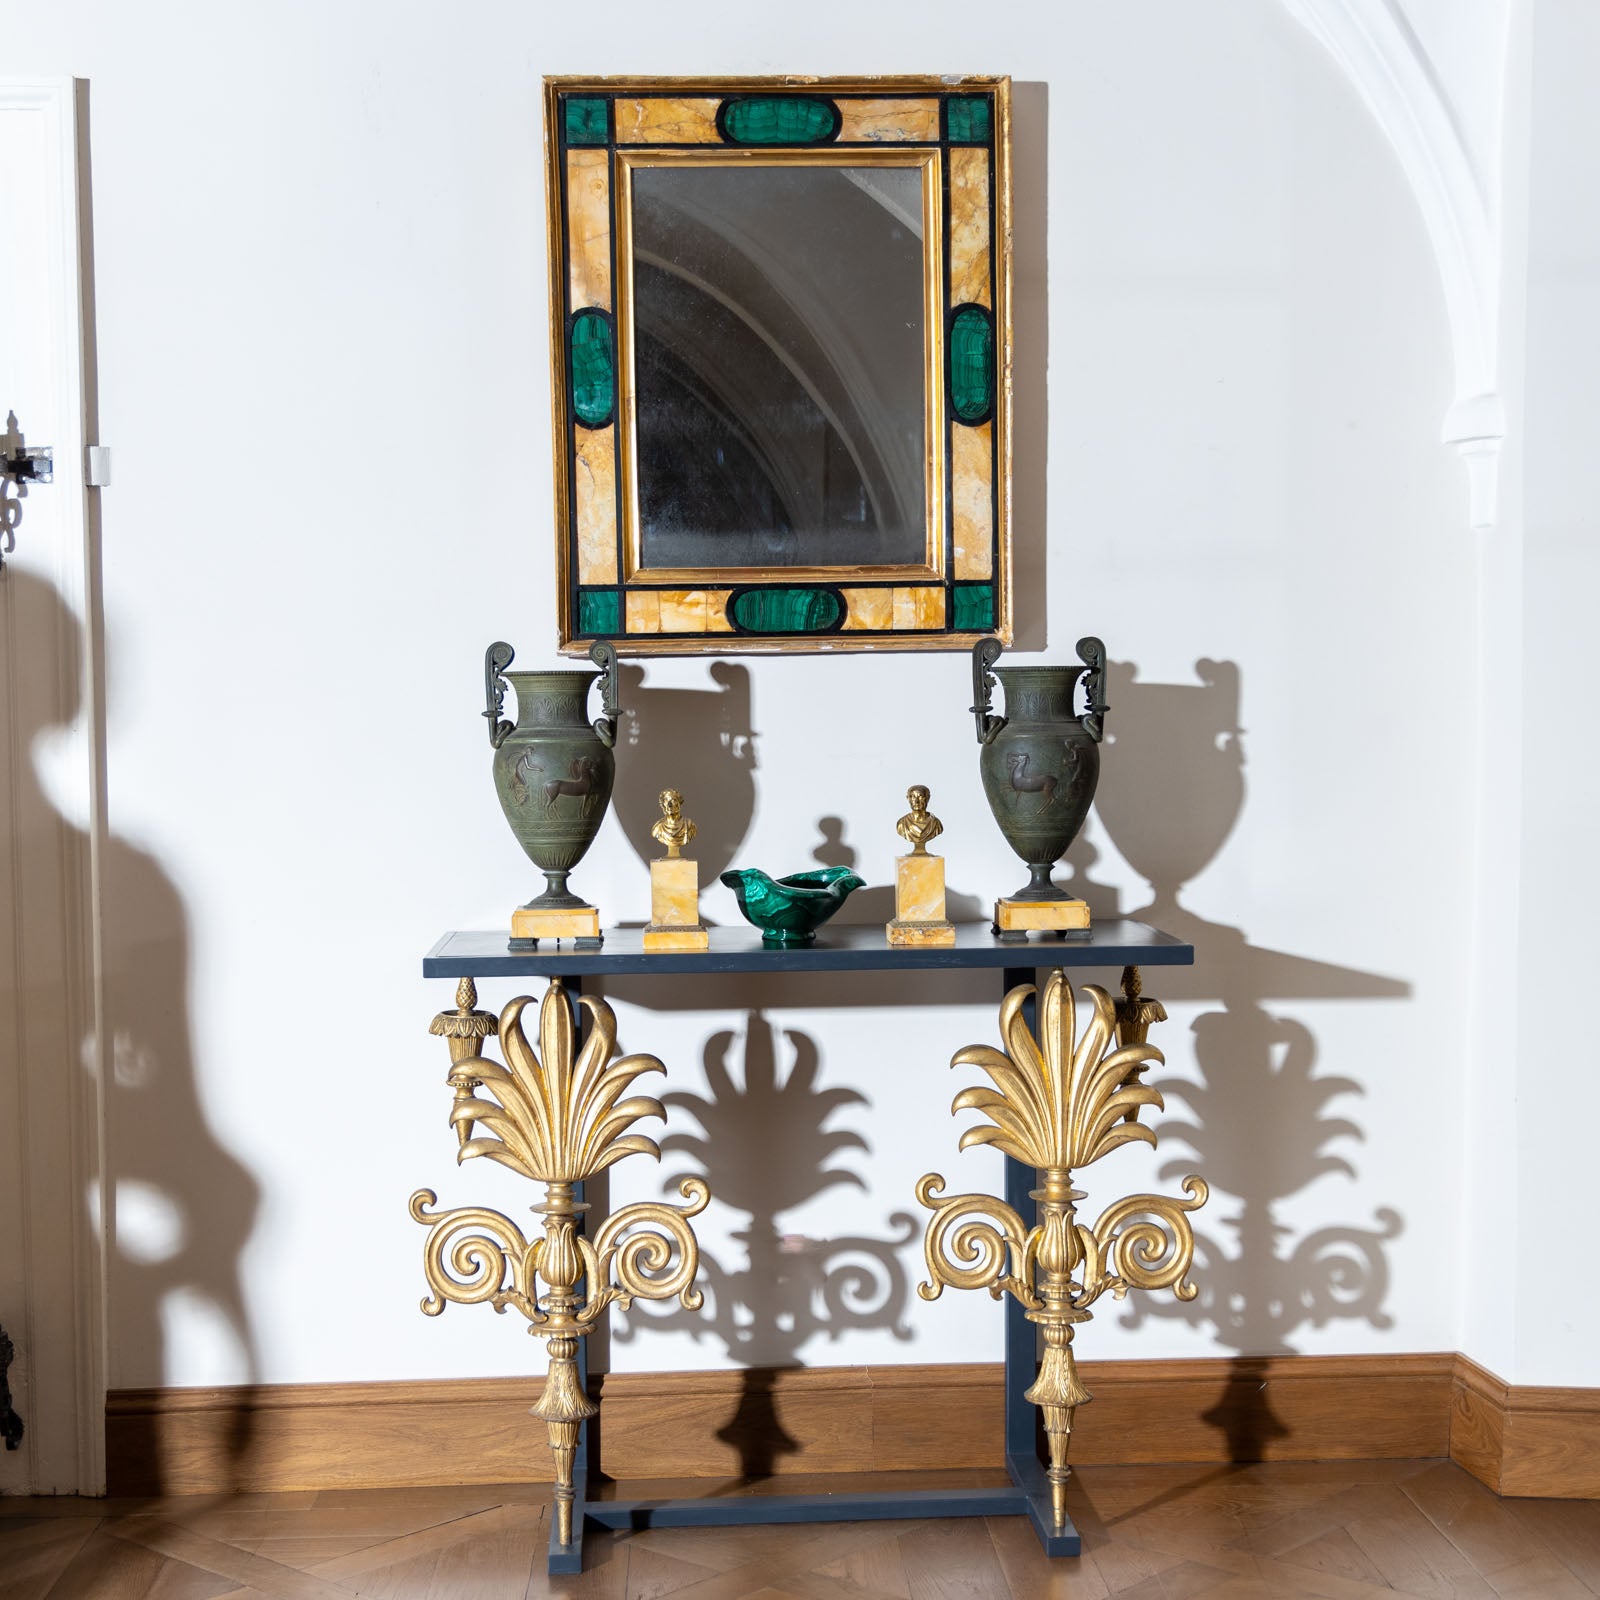 Italian Pair of Wall Mirrors in Giallo Siena and Malachite, Italy 18th Century For Sale